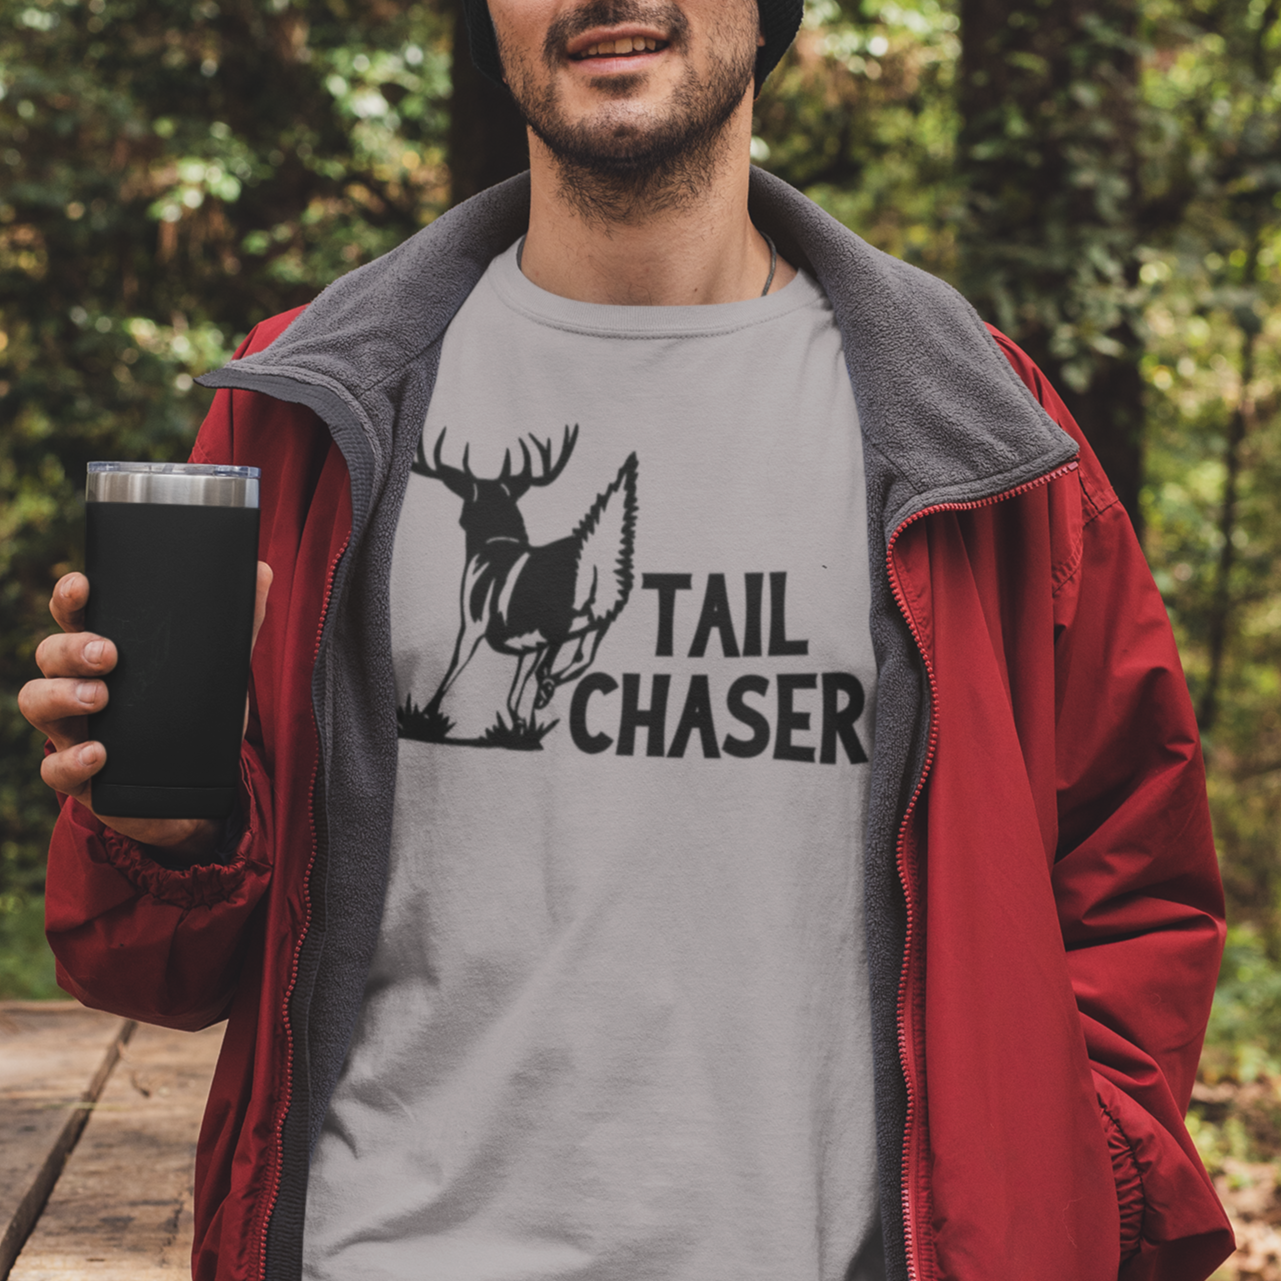 tail-chaser-athletic-heather-grey-t-shirt-mockup-featuring-a-man-holding-a-20-oz-travel-mug-in-the-woods